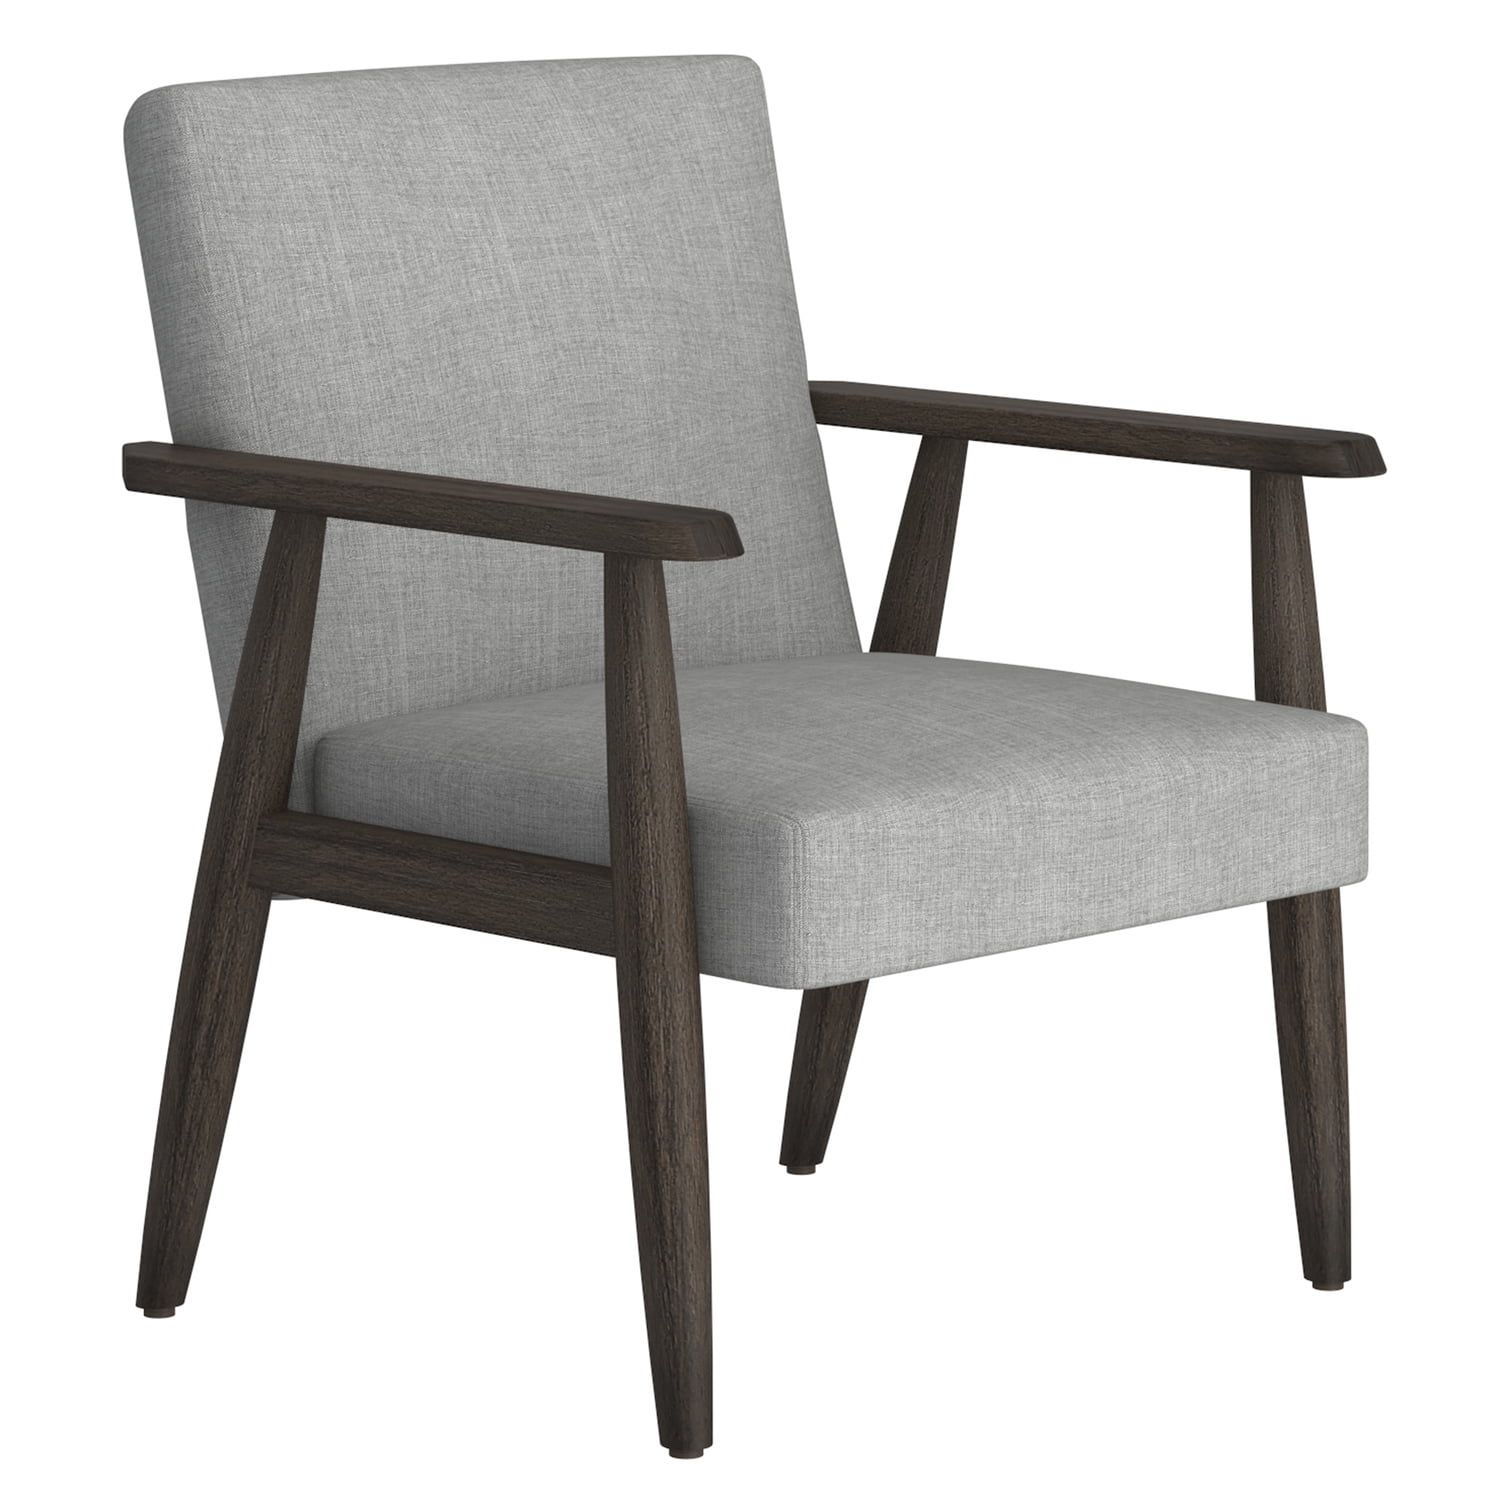 Mid-Century Modern Gray Accent Chair with Weathered Wood Frame